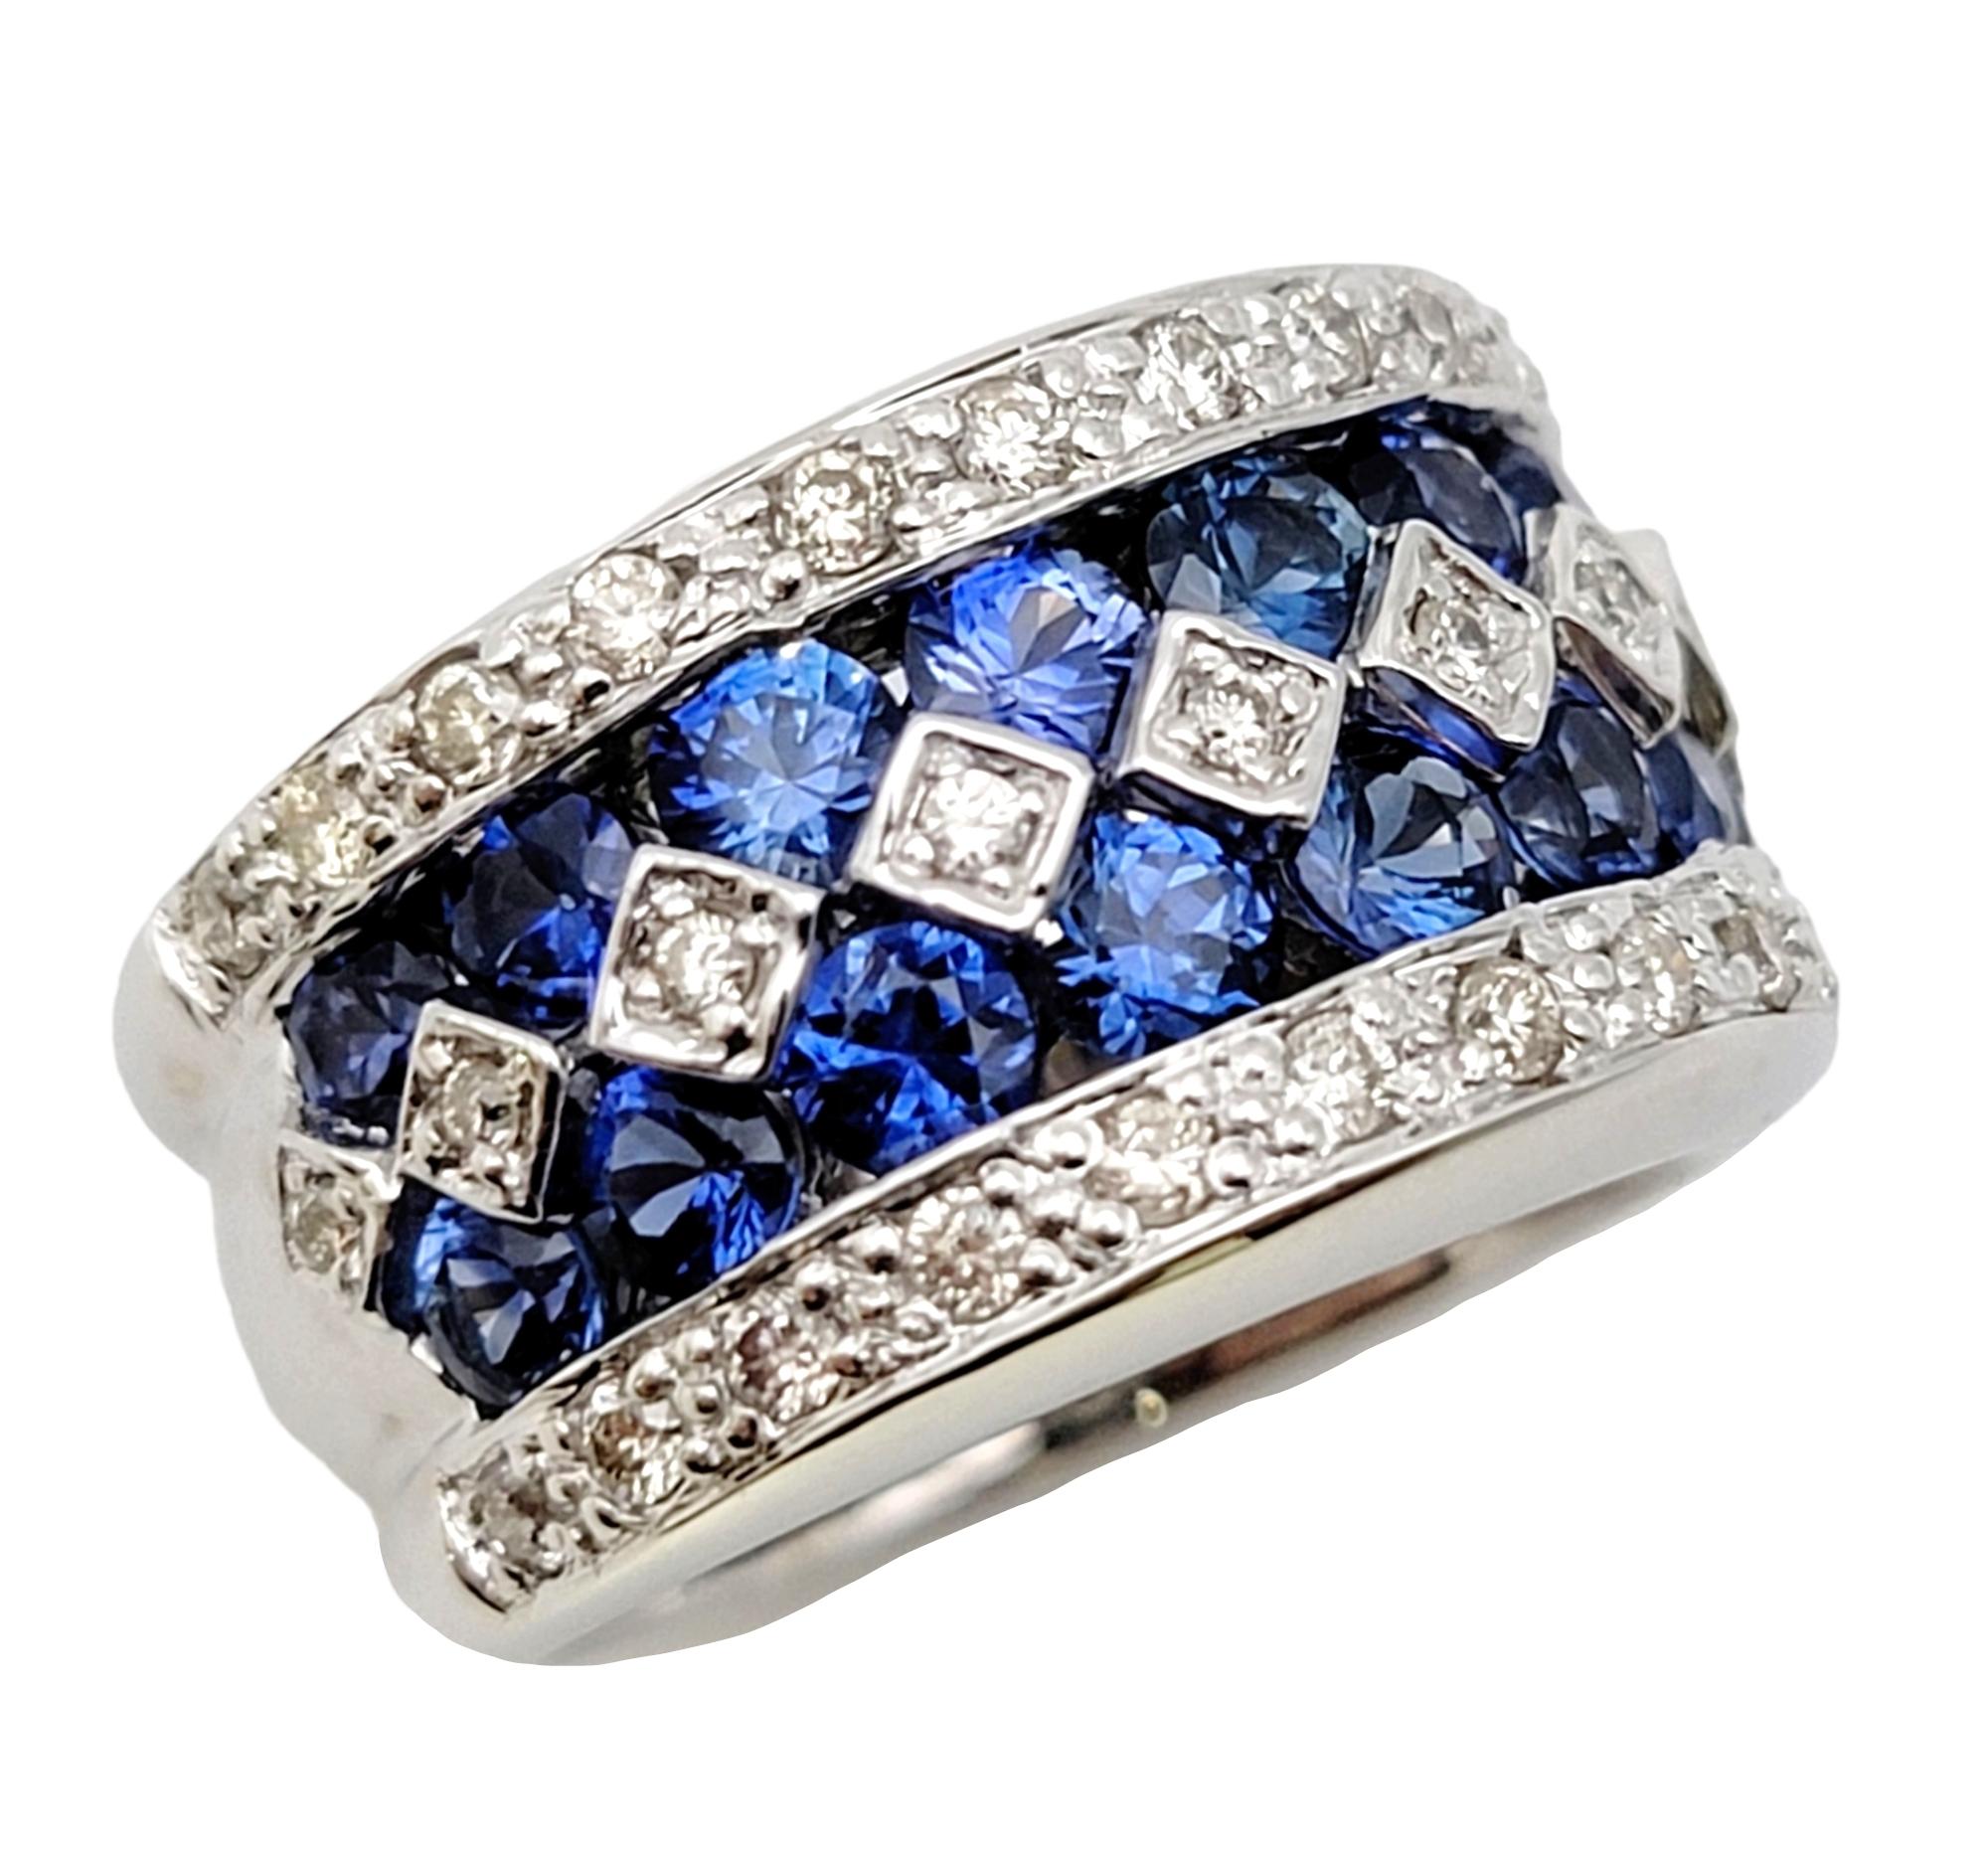 Ring size: 5

This spectacularly sparkly sapphire and diamond band ring will fill your finger with unparalleled beauty. Filled from end to end with dazzling white diamonds and sparkling blue sapphires, you'll simply adore how these exceptional